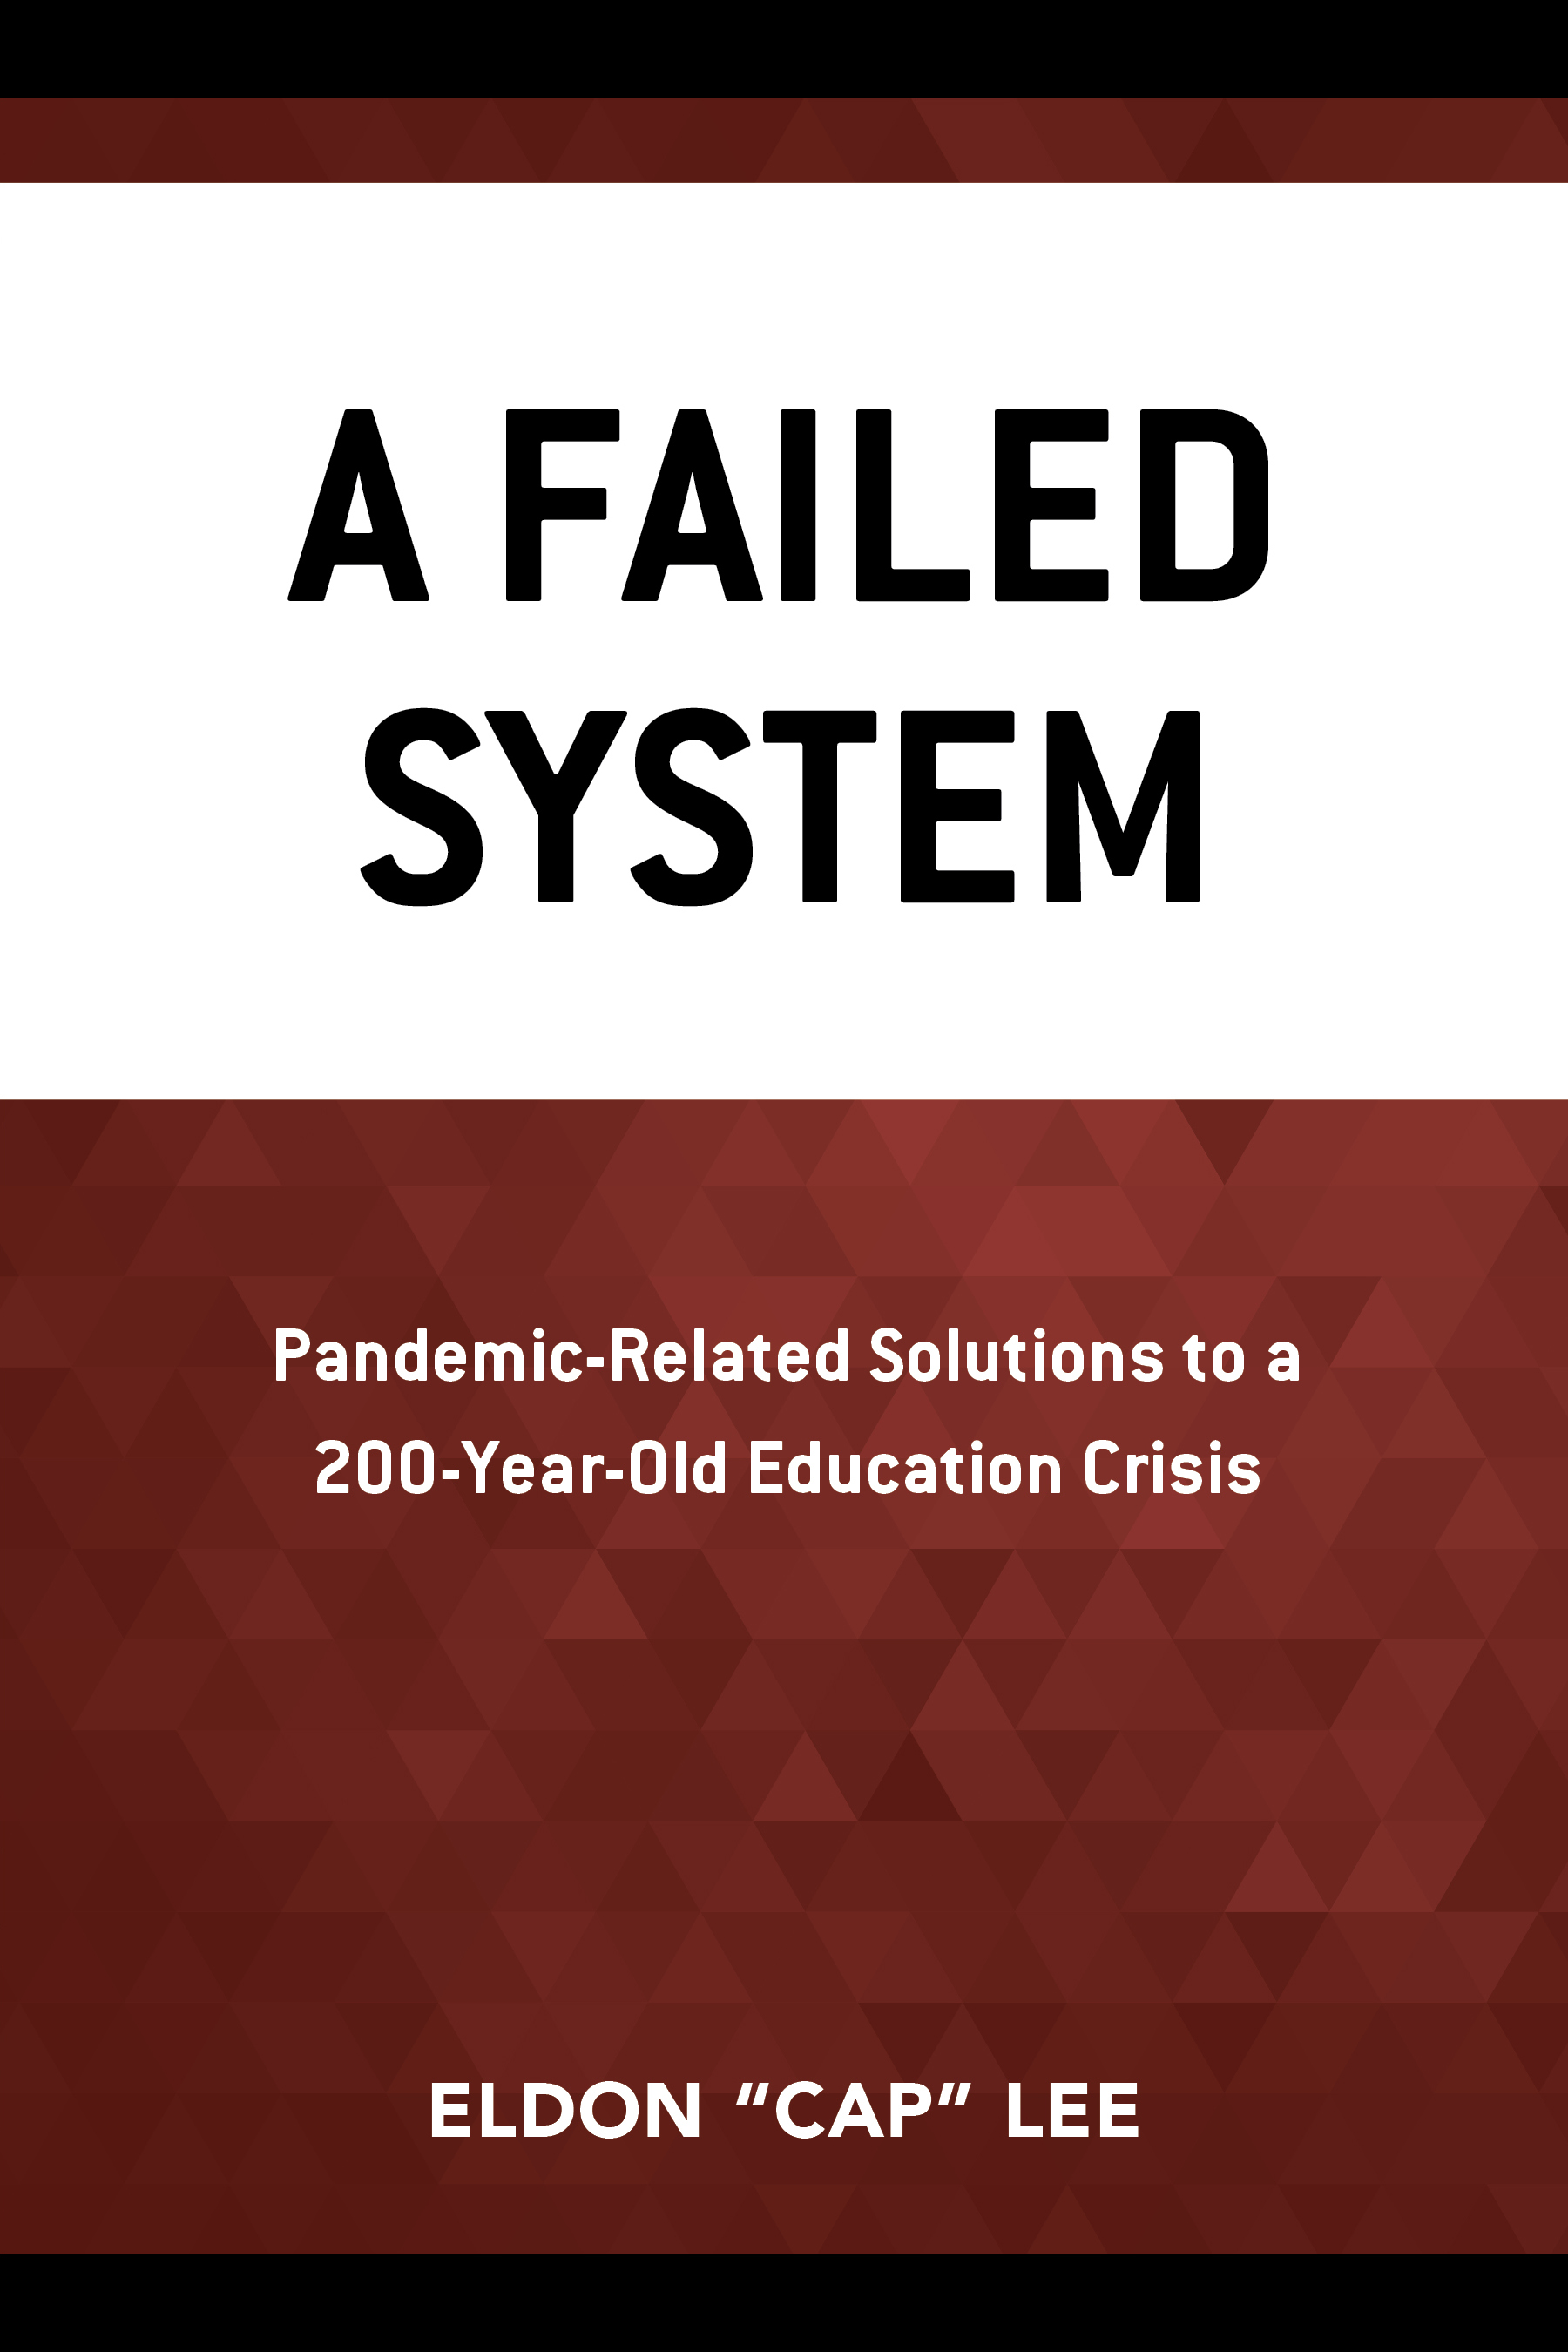 A Failed System: Pandemic-Related Solutions to a 200-Year-Old Education Crisis